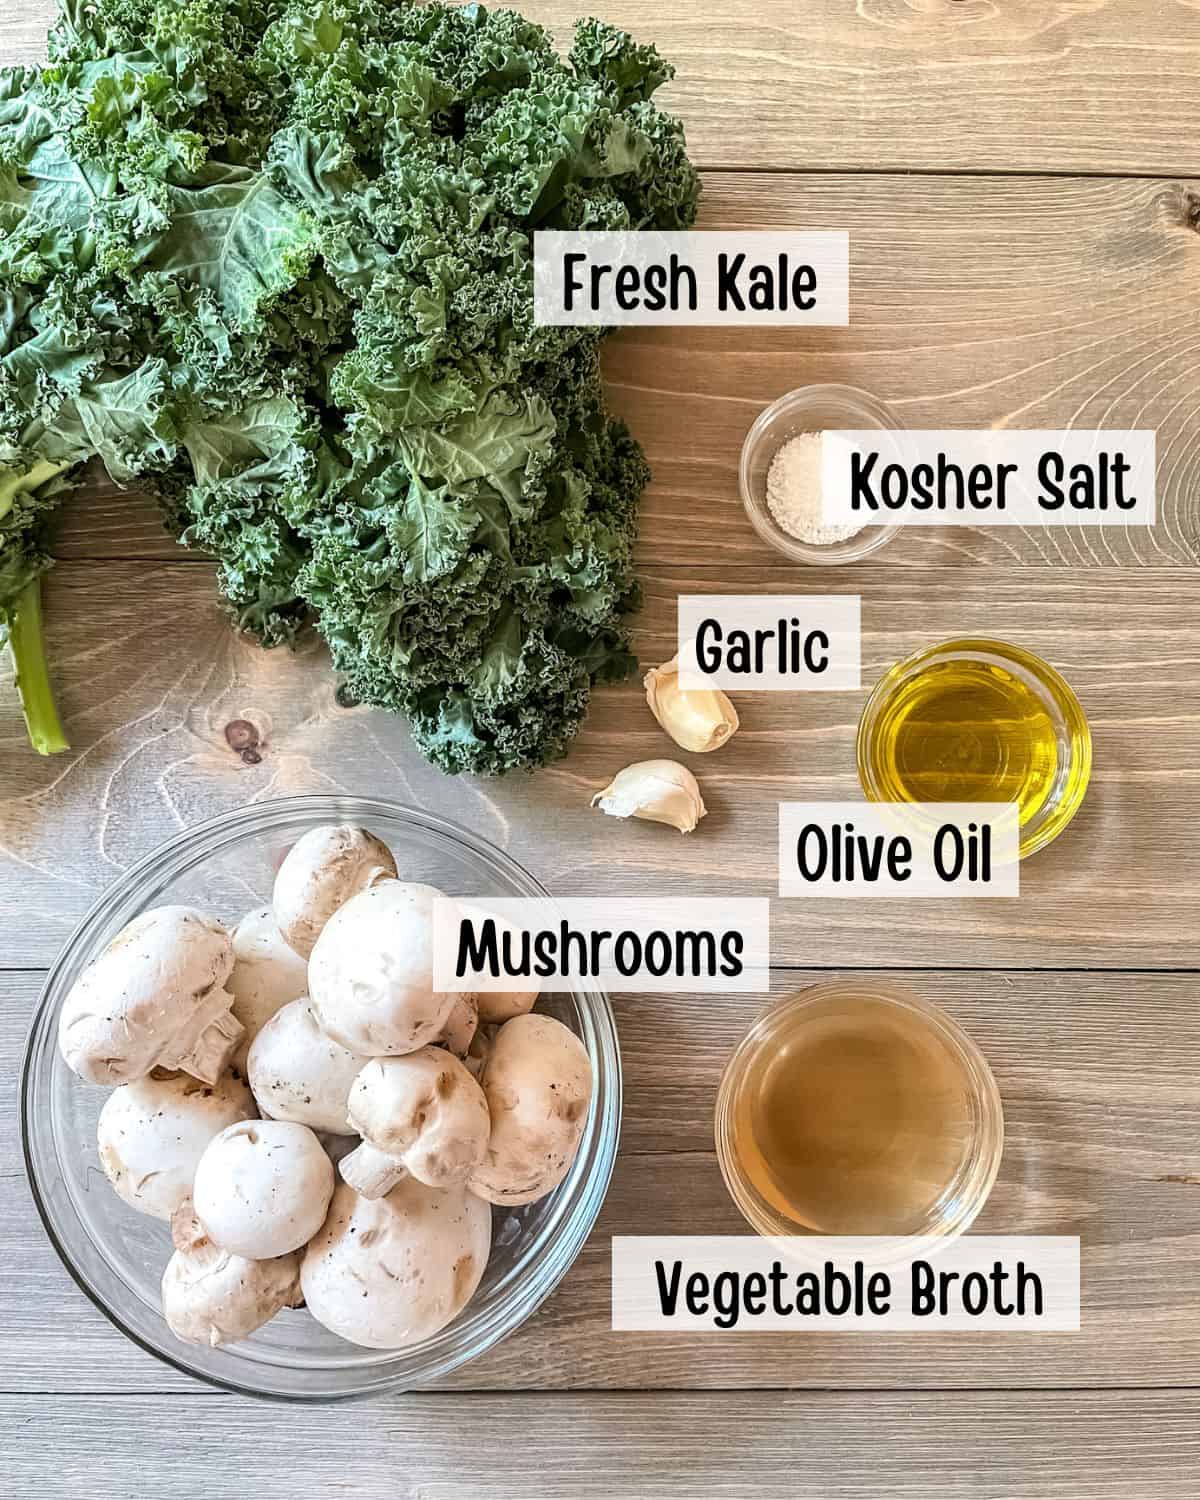 Ingredients needed to make this kale and mushroom recipe.